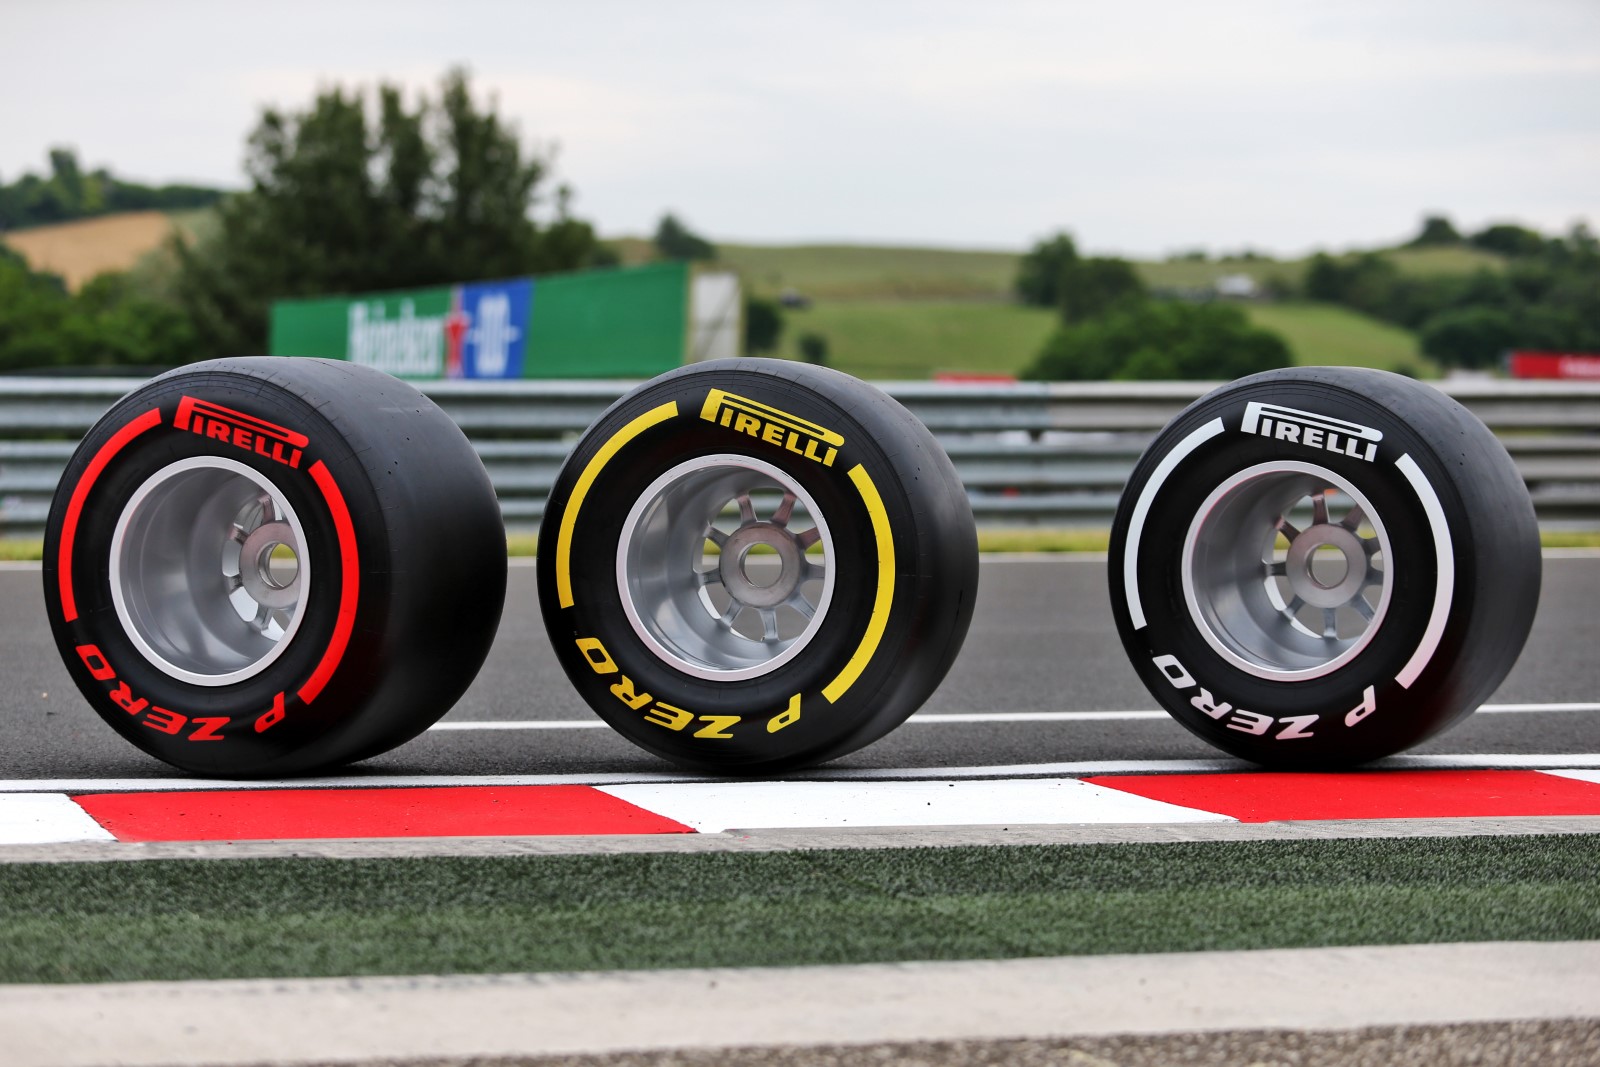 Pirelli reveal tyre compounds for the full 2021 F1 calendar